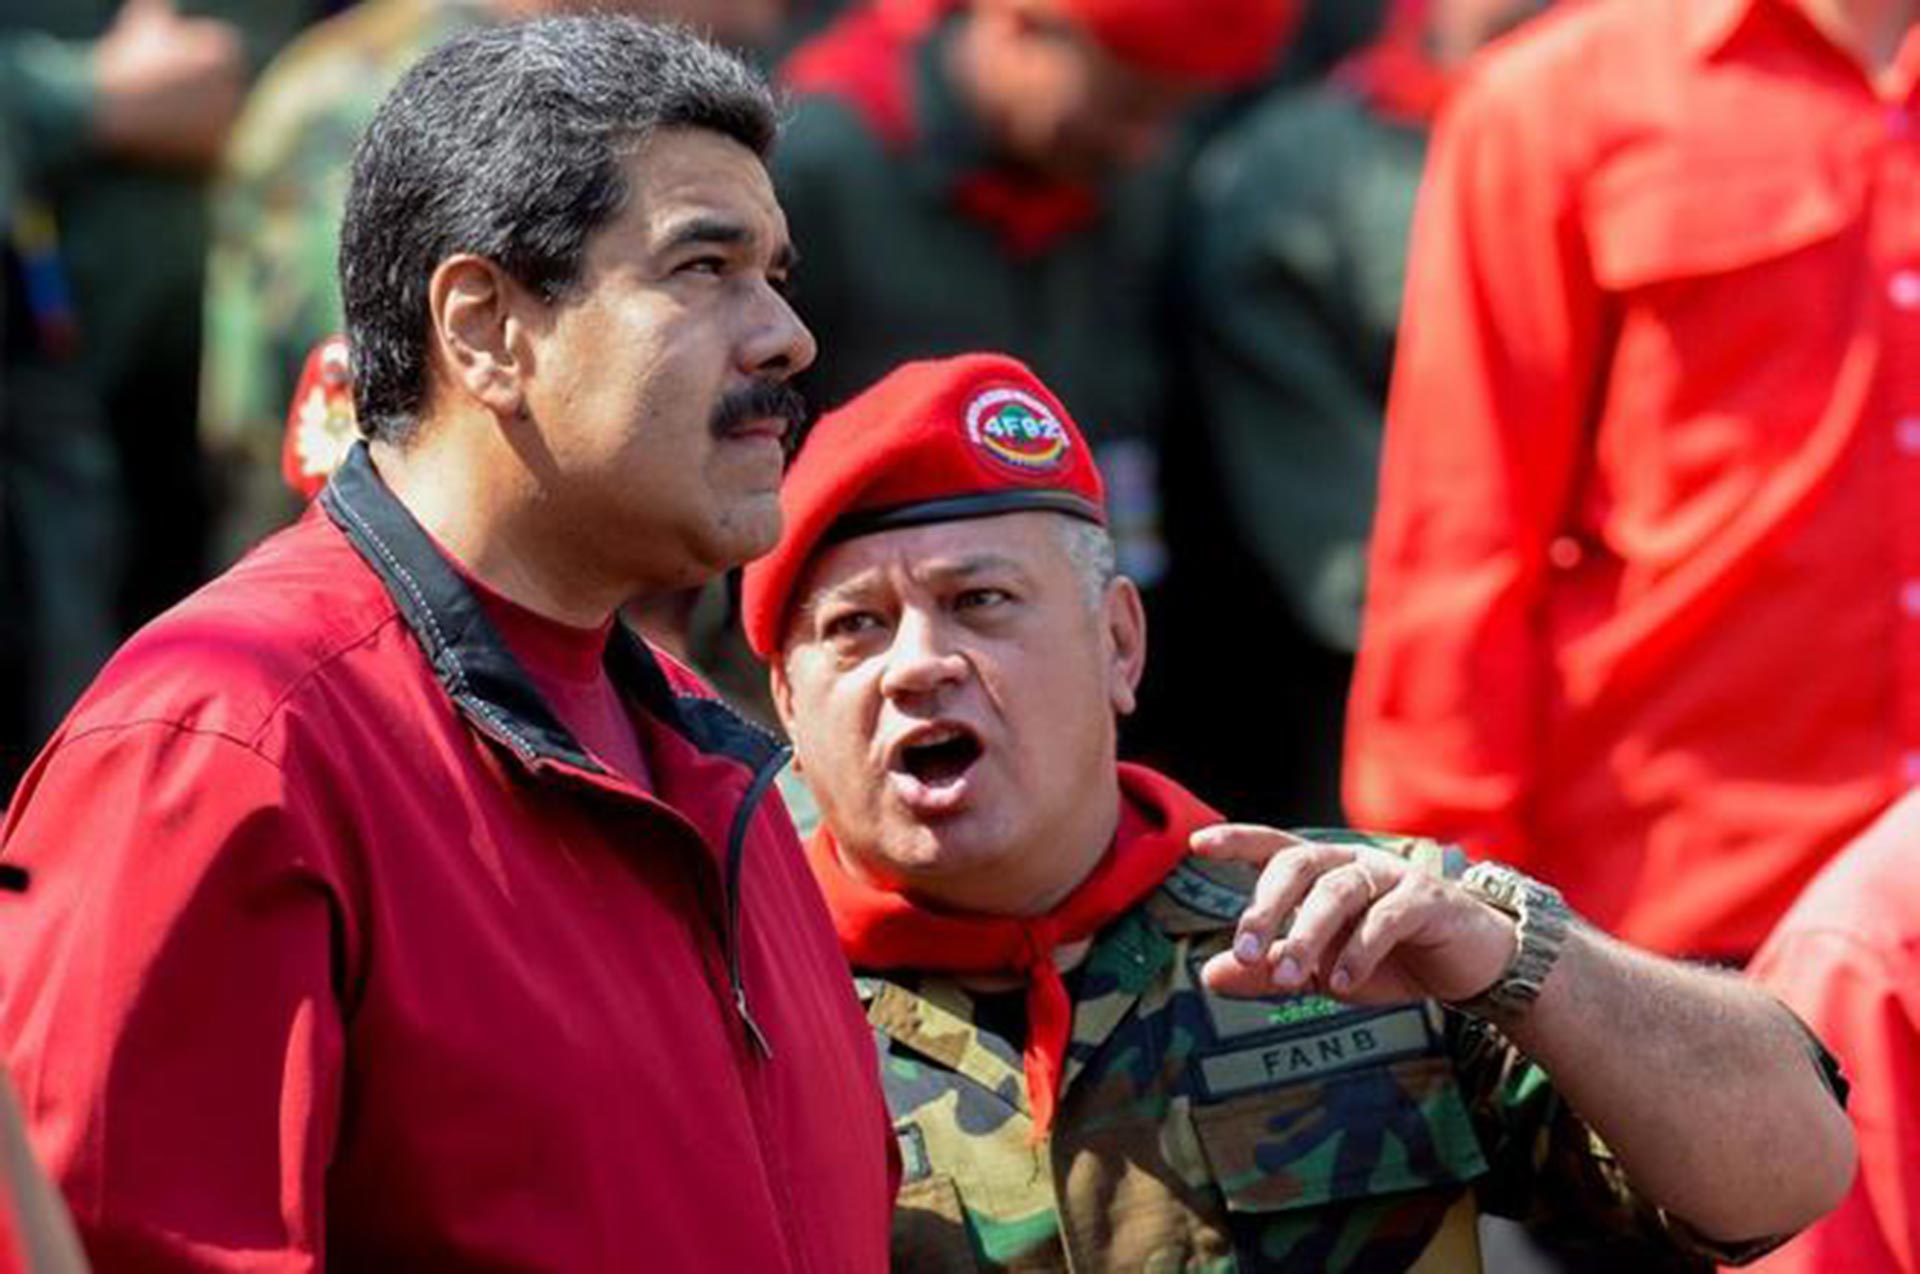 Diosdado Cabello hinted at an operation to “decocainize” Colombia similar to the invasion of Ukraine